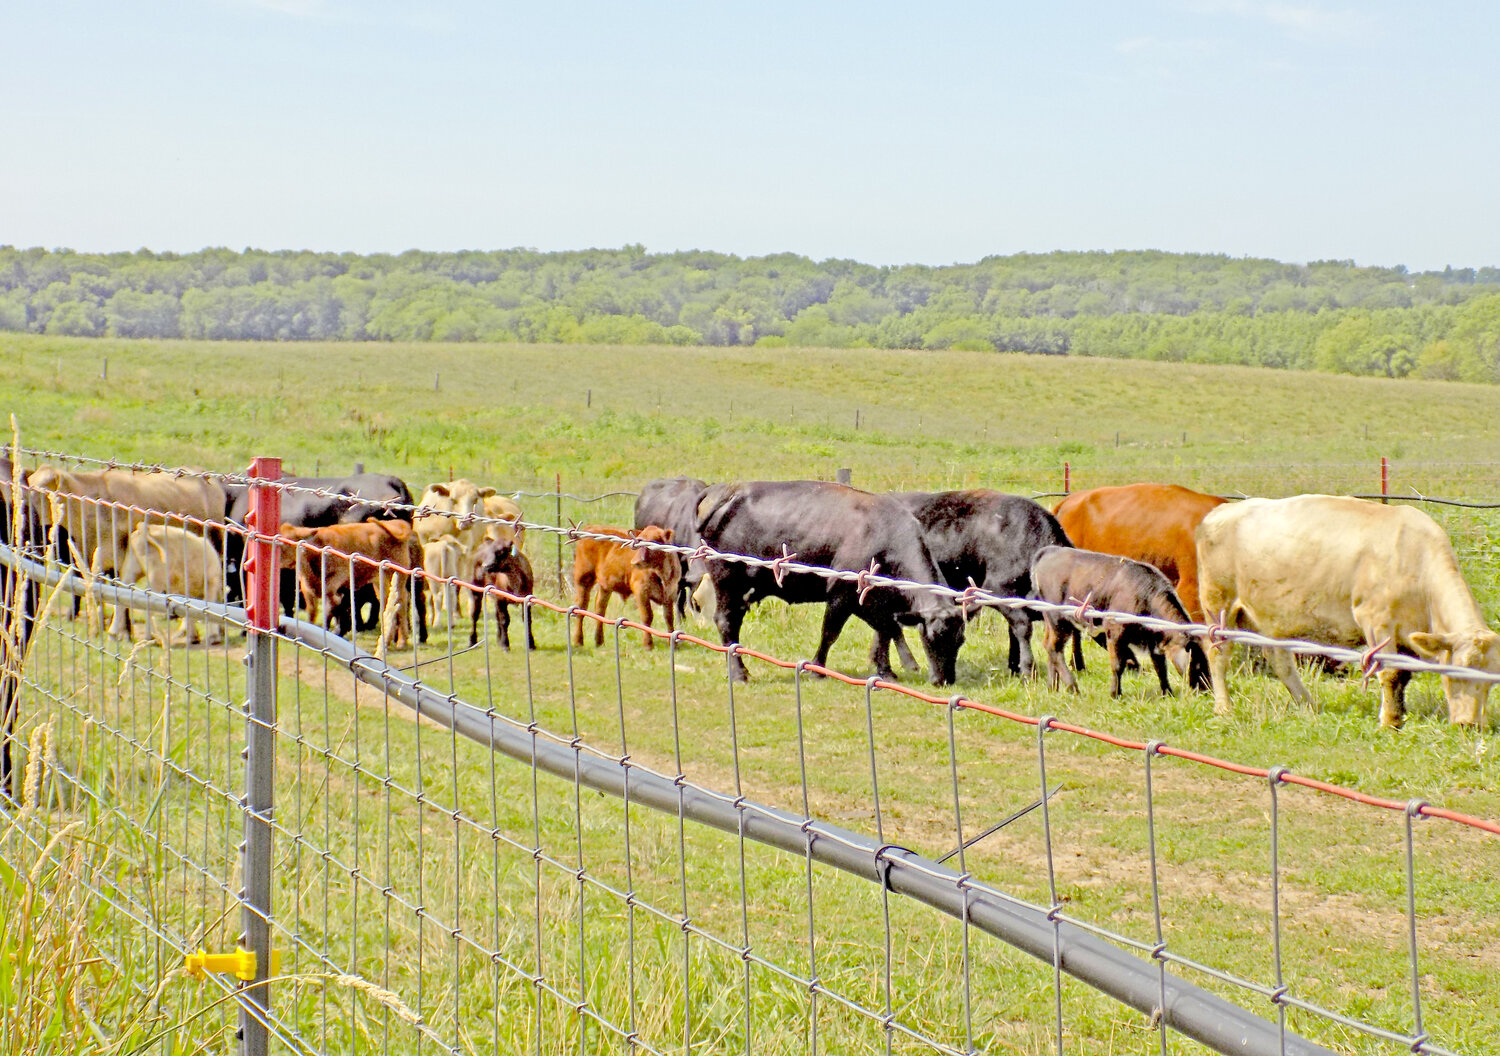 A variety of cattle breeds graze rotationally on the pasture.